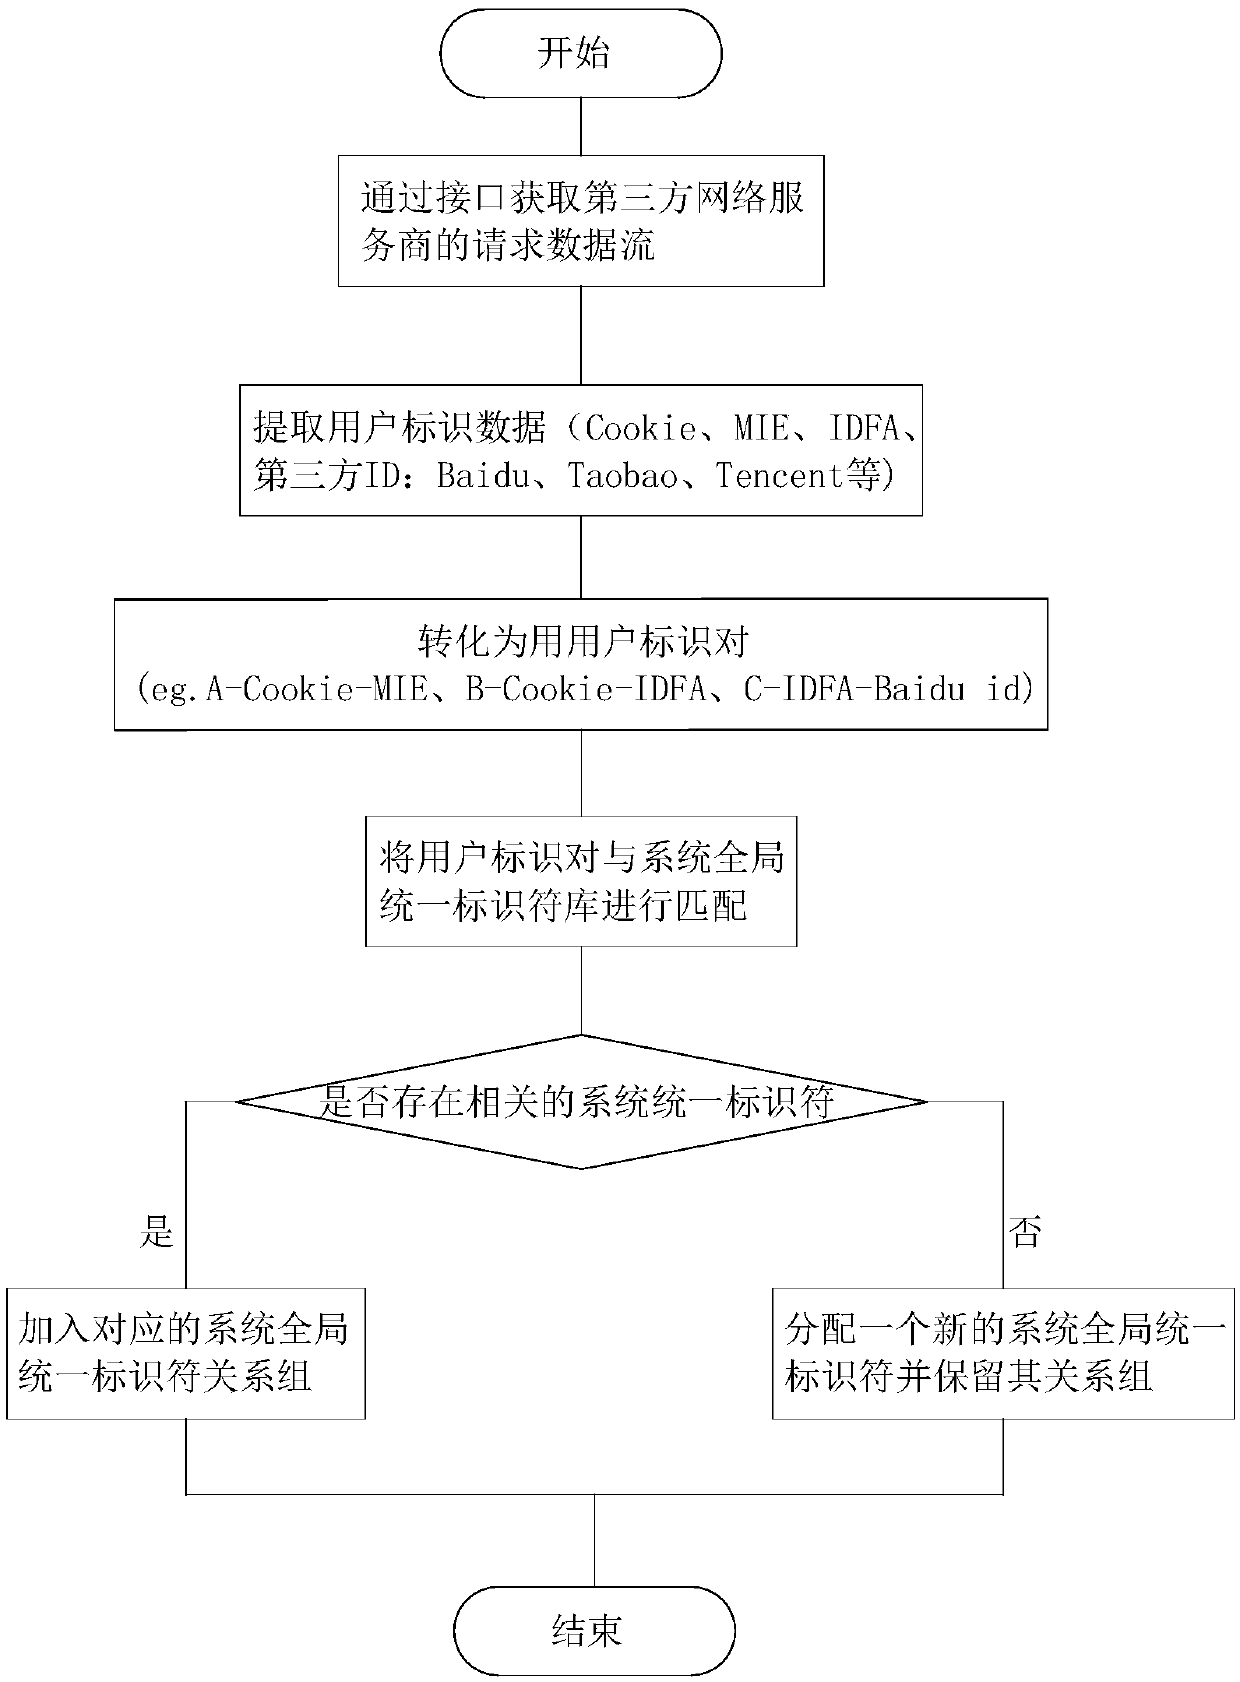 Internet globally unique identifier generation system and generation method thereof